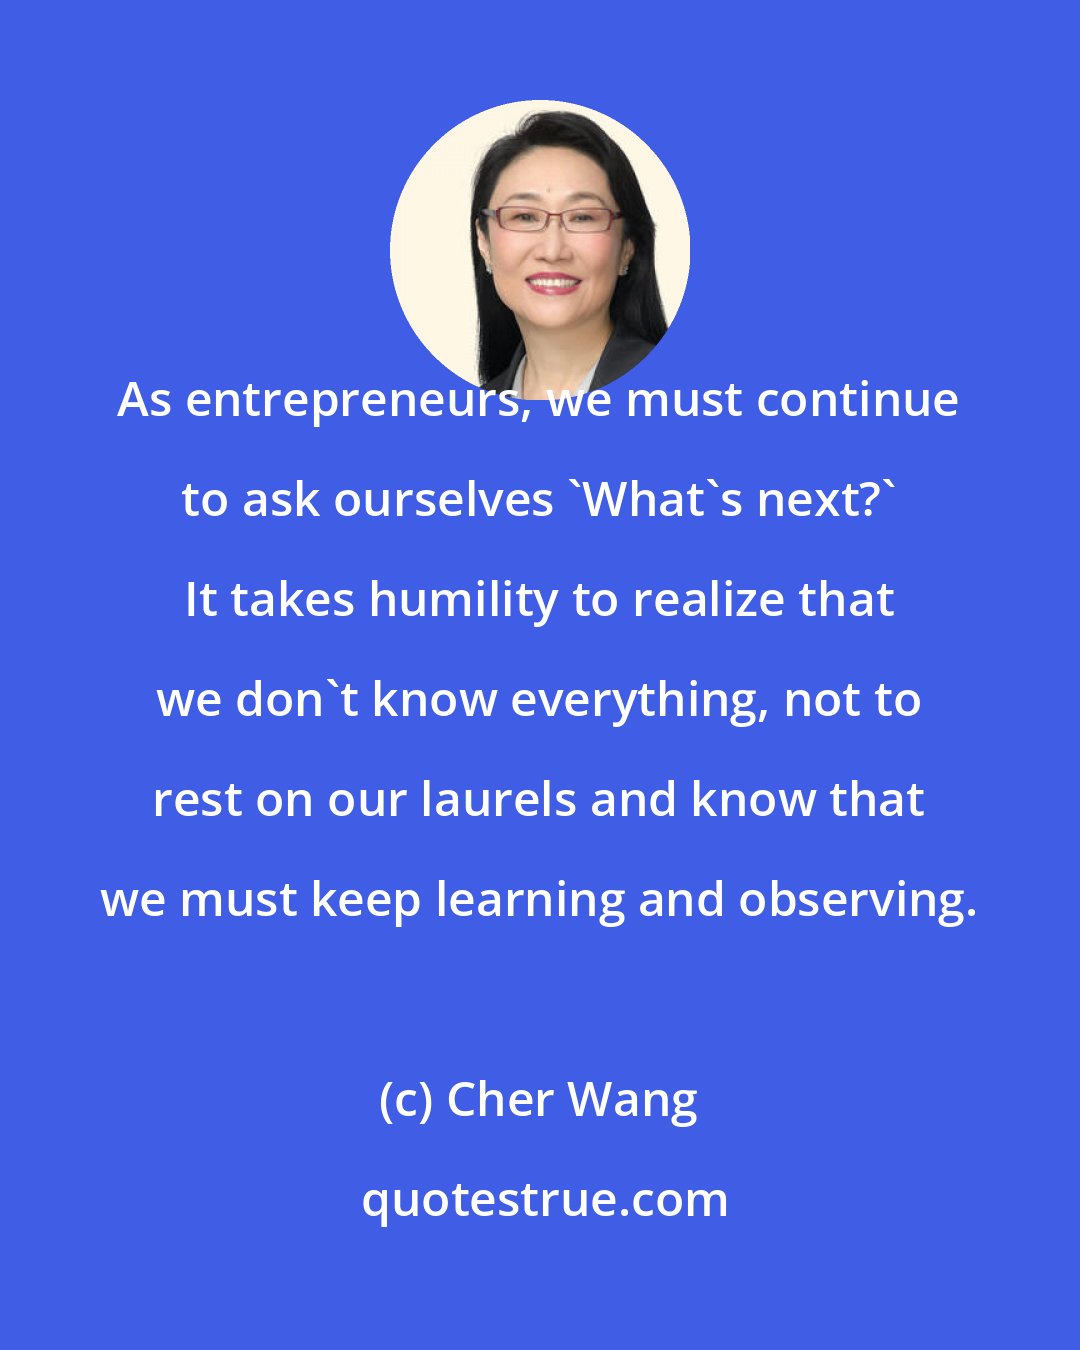 Cher Wang: As entrepreneurs, we must continue to ask ourselves 'What's next?' It takes humility to realize that we don't know everything, not to rest on our laurels and know that we must keep learning and observing.